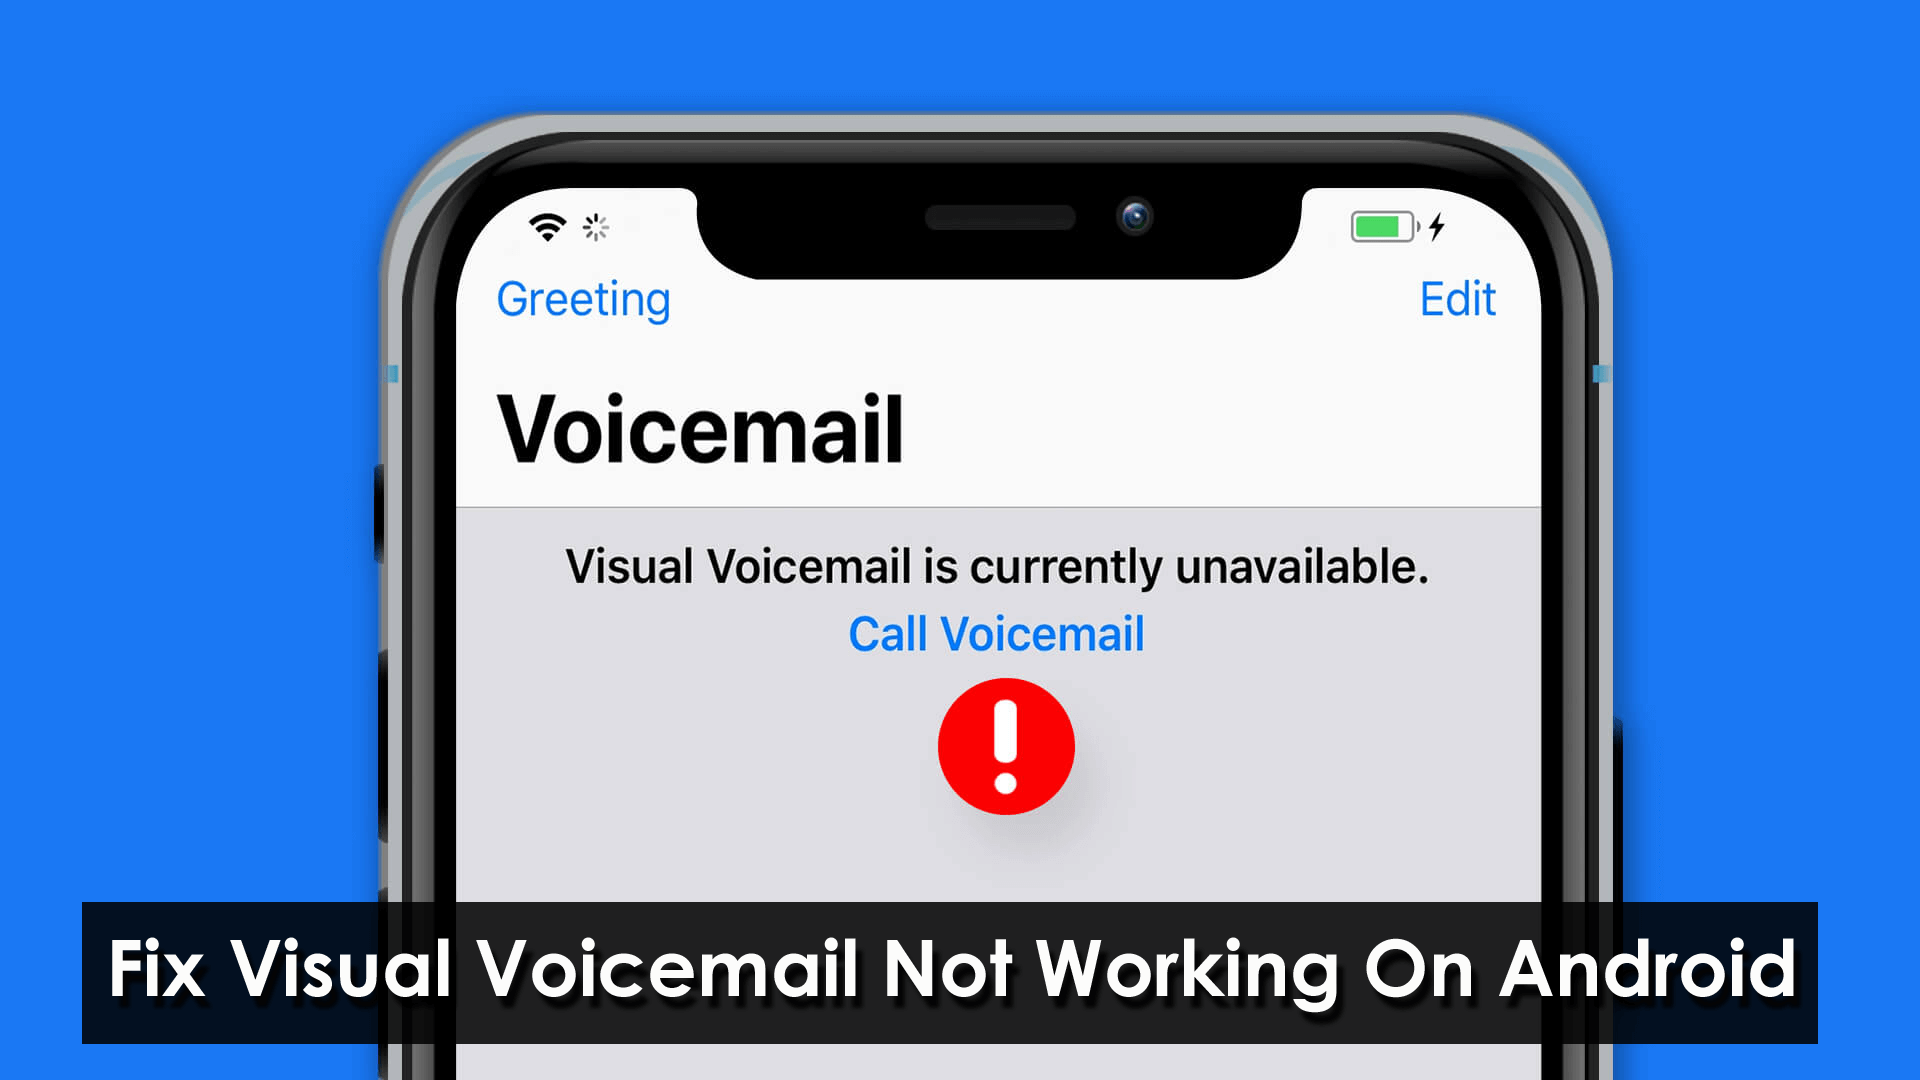 Fix Visual Voicemail Not Working On Android